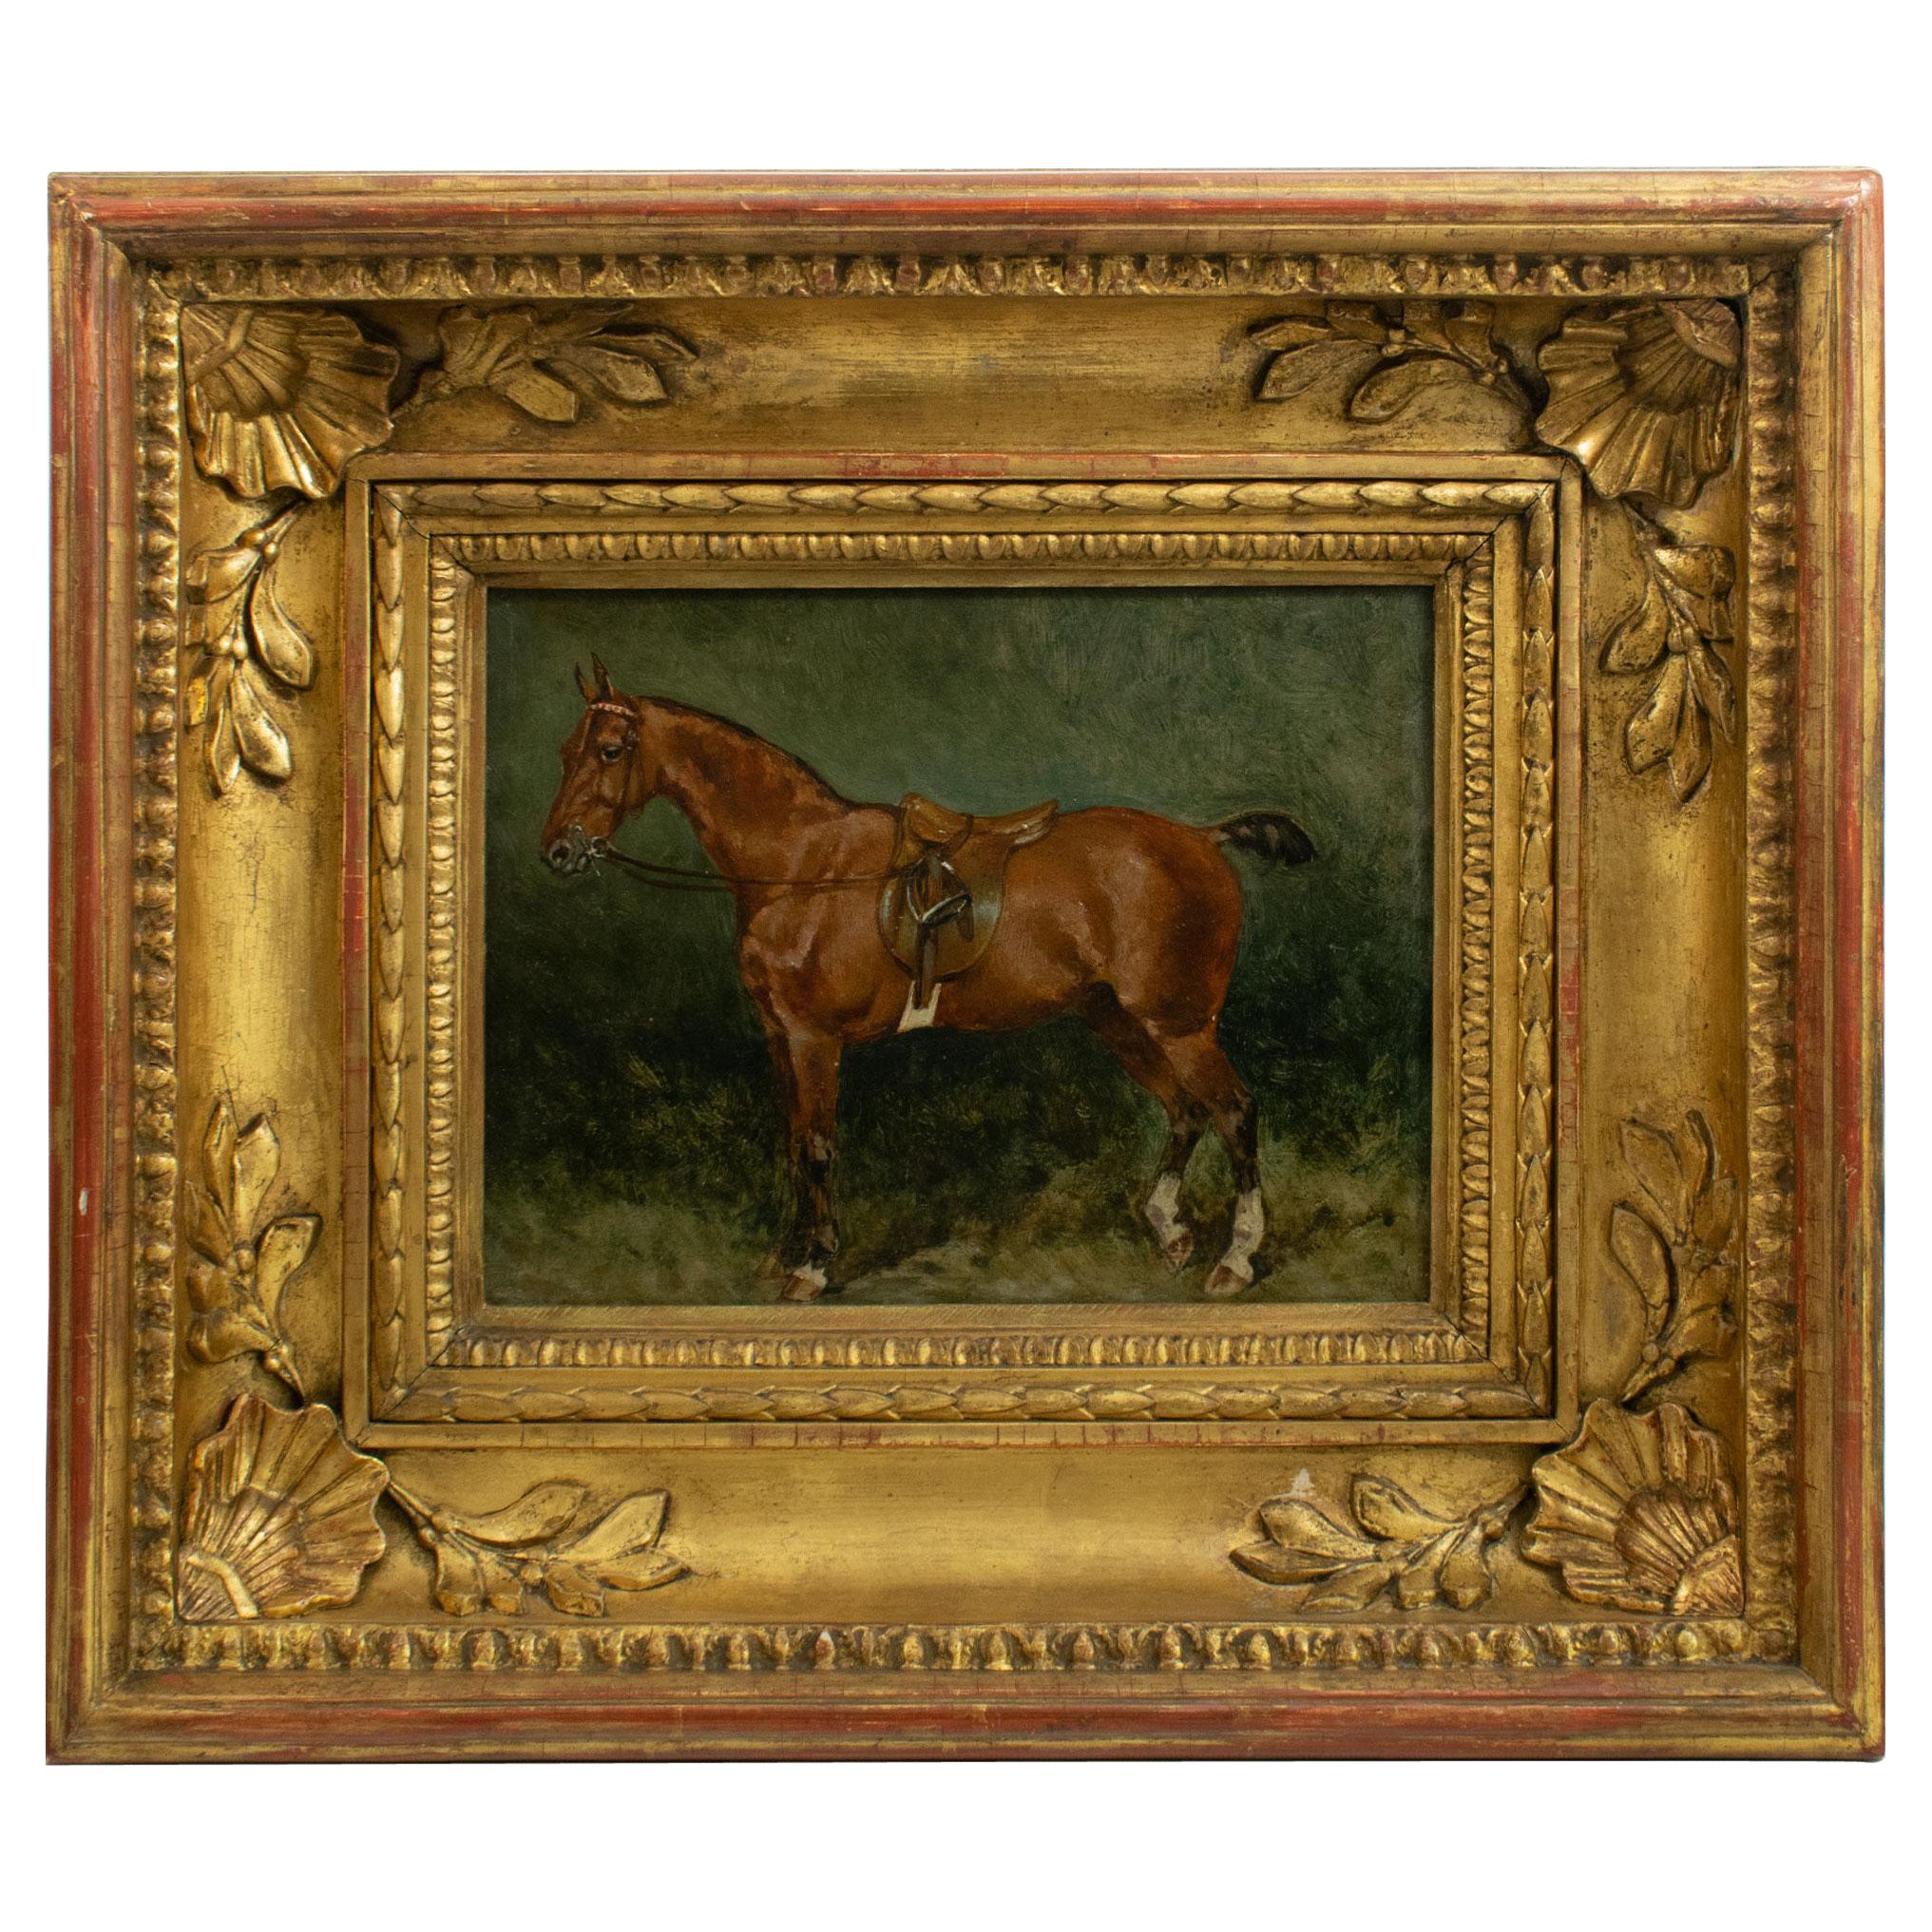 French School Late 19th century, The Bay Riding Horse, oil on panel